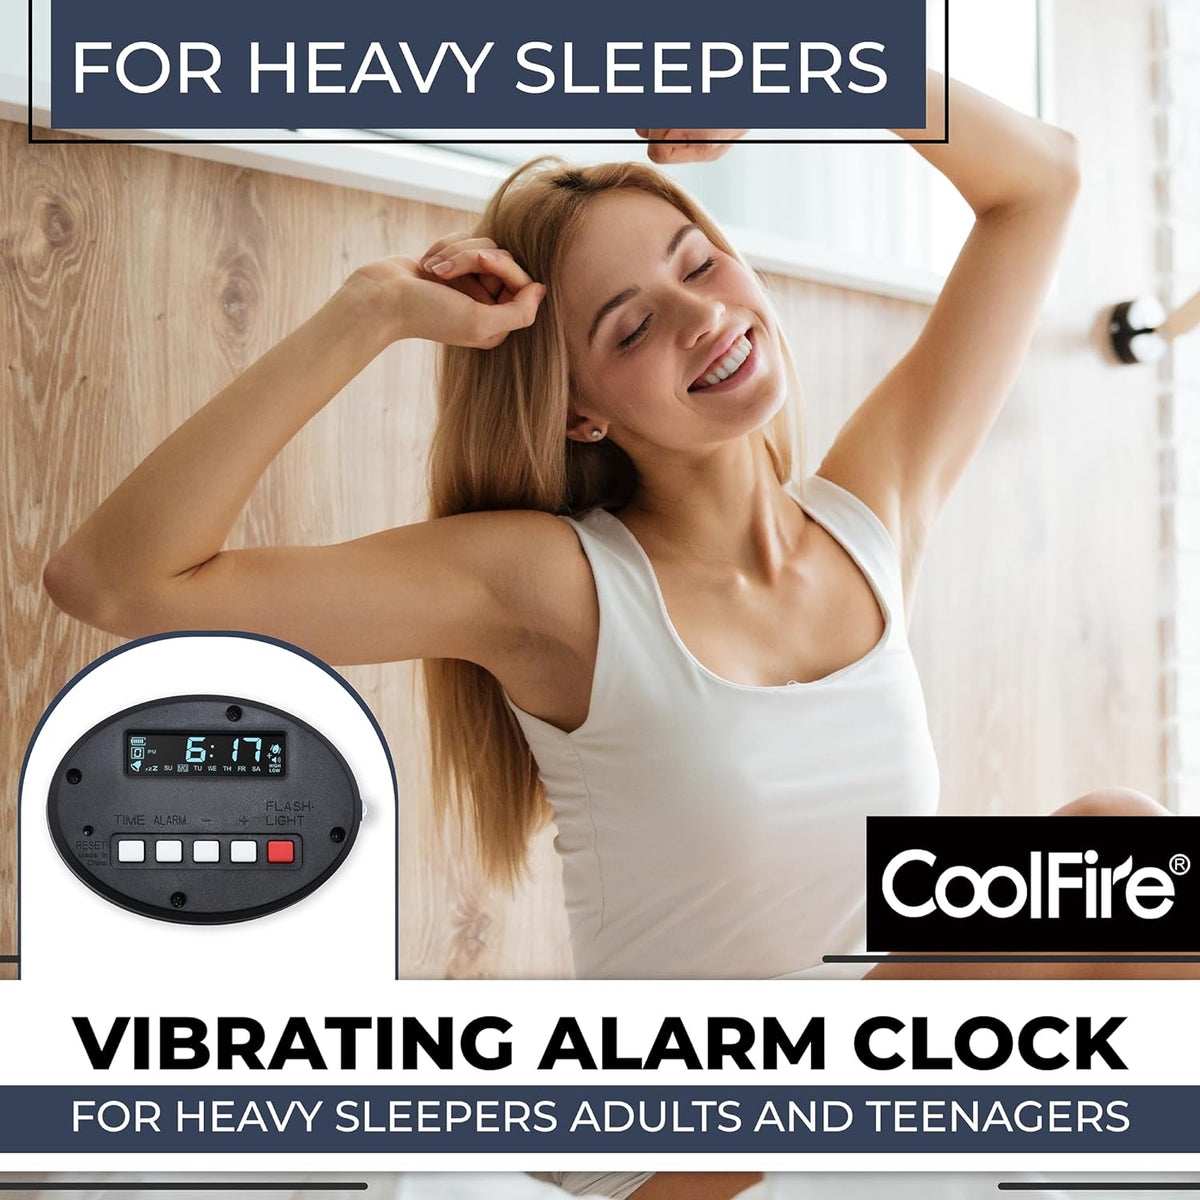 Vibrating Alarm Clock for Heavy Sleepers Adults and Teenagers with LCD Time Display - The Ultimate Wake-Up Solution for Heavy Sleepers, Travelers & Hearing Impaired- Rechargeable, Optional Alarm VB01B (Black)